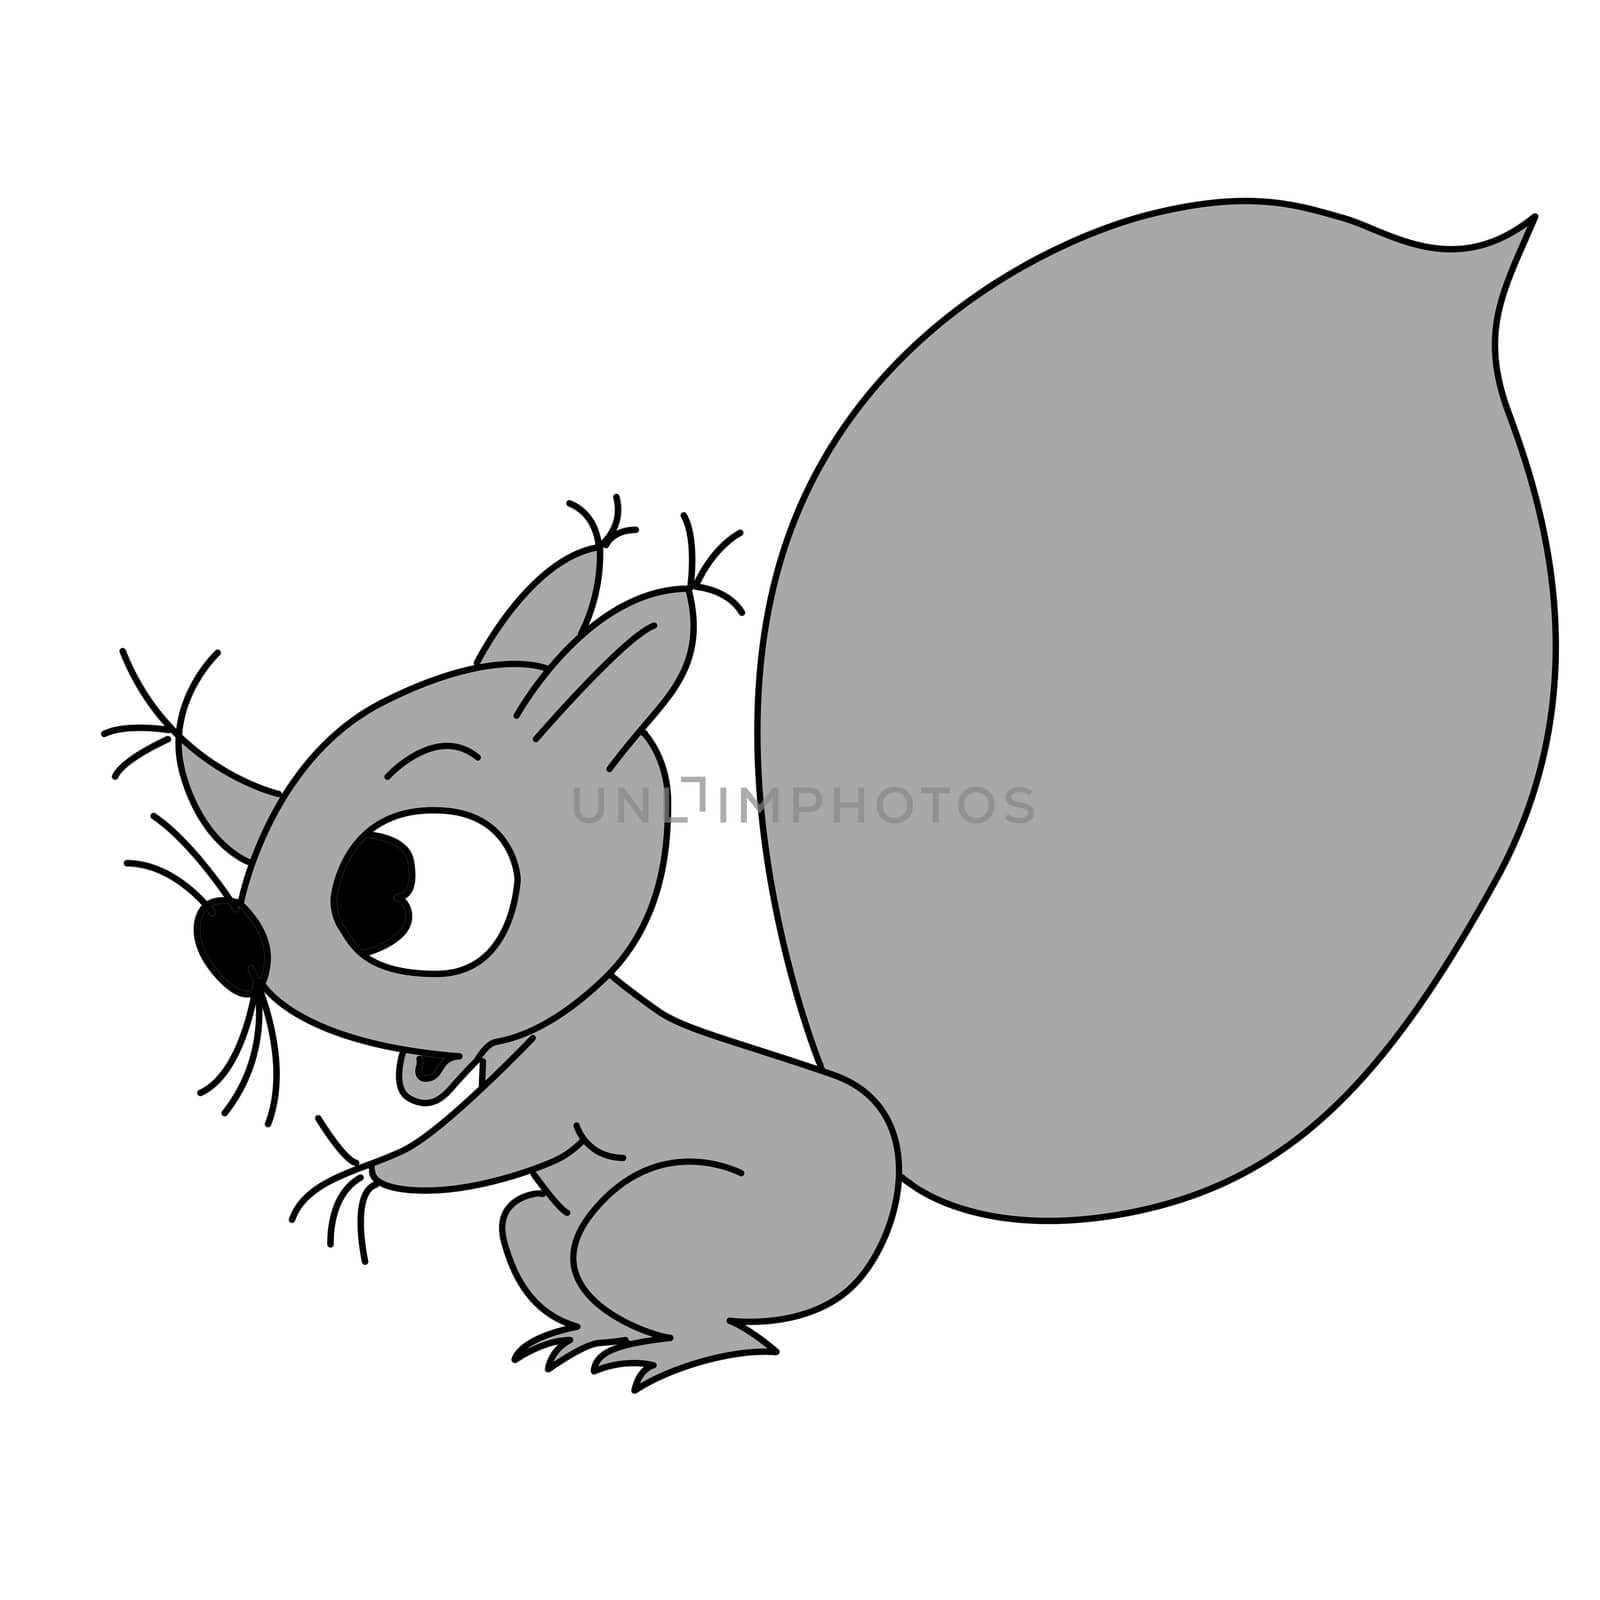 drawing squirrel on white background